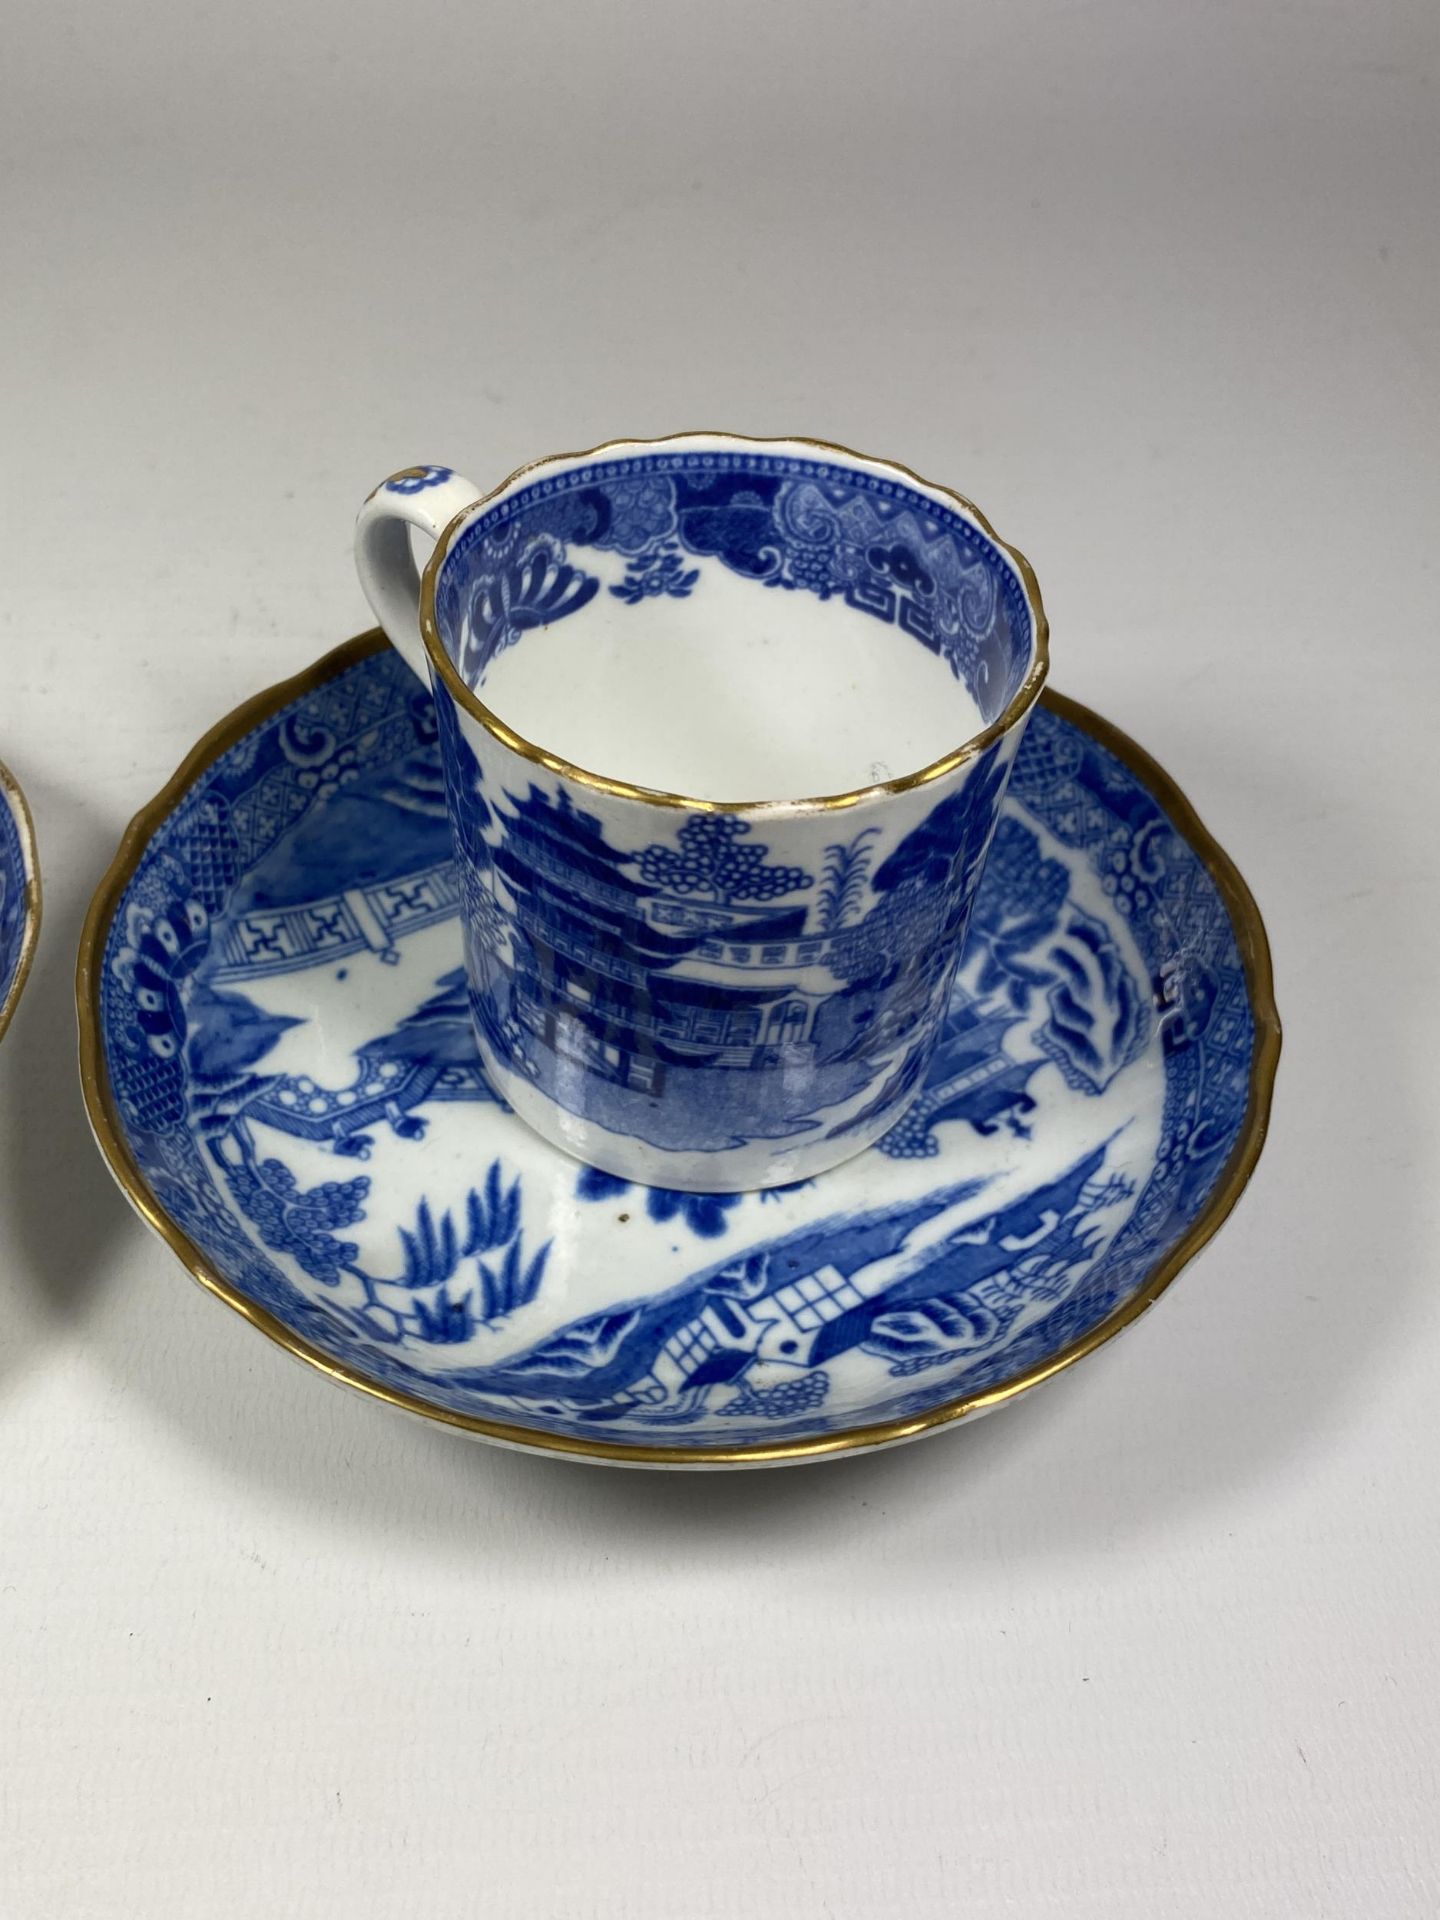 TWO CHINESE QING EXPORT BLUE AND WHITE PORCELAIN CUPS & SAUCERS, CUP HEIGHT 6.5CM - Image 3 of 6